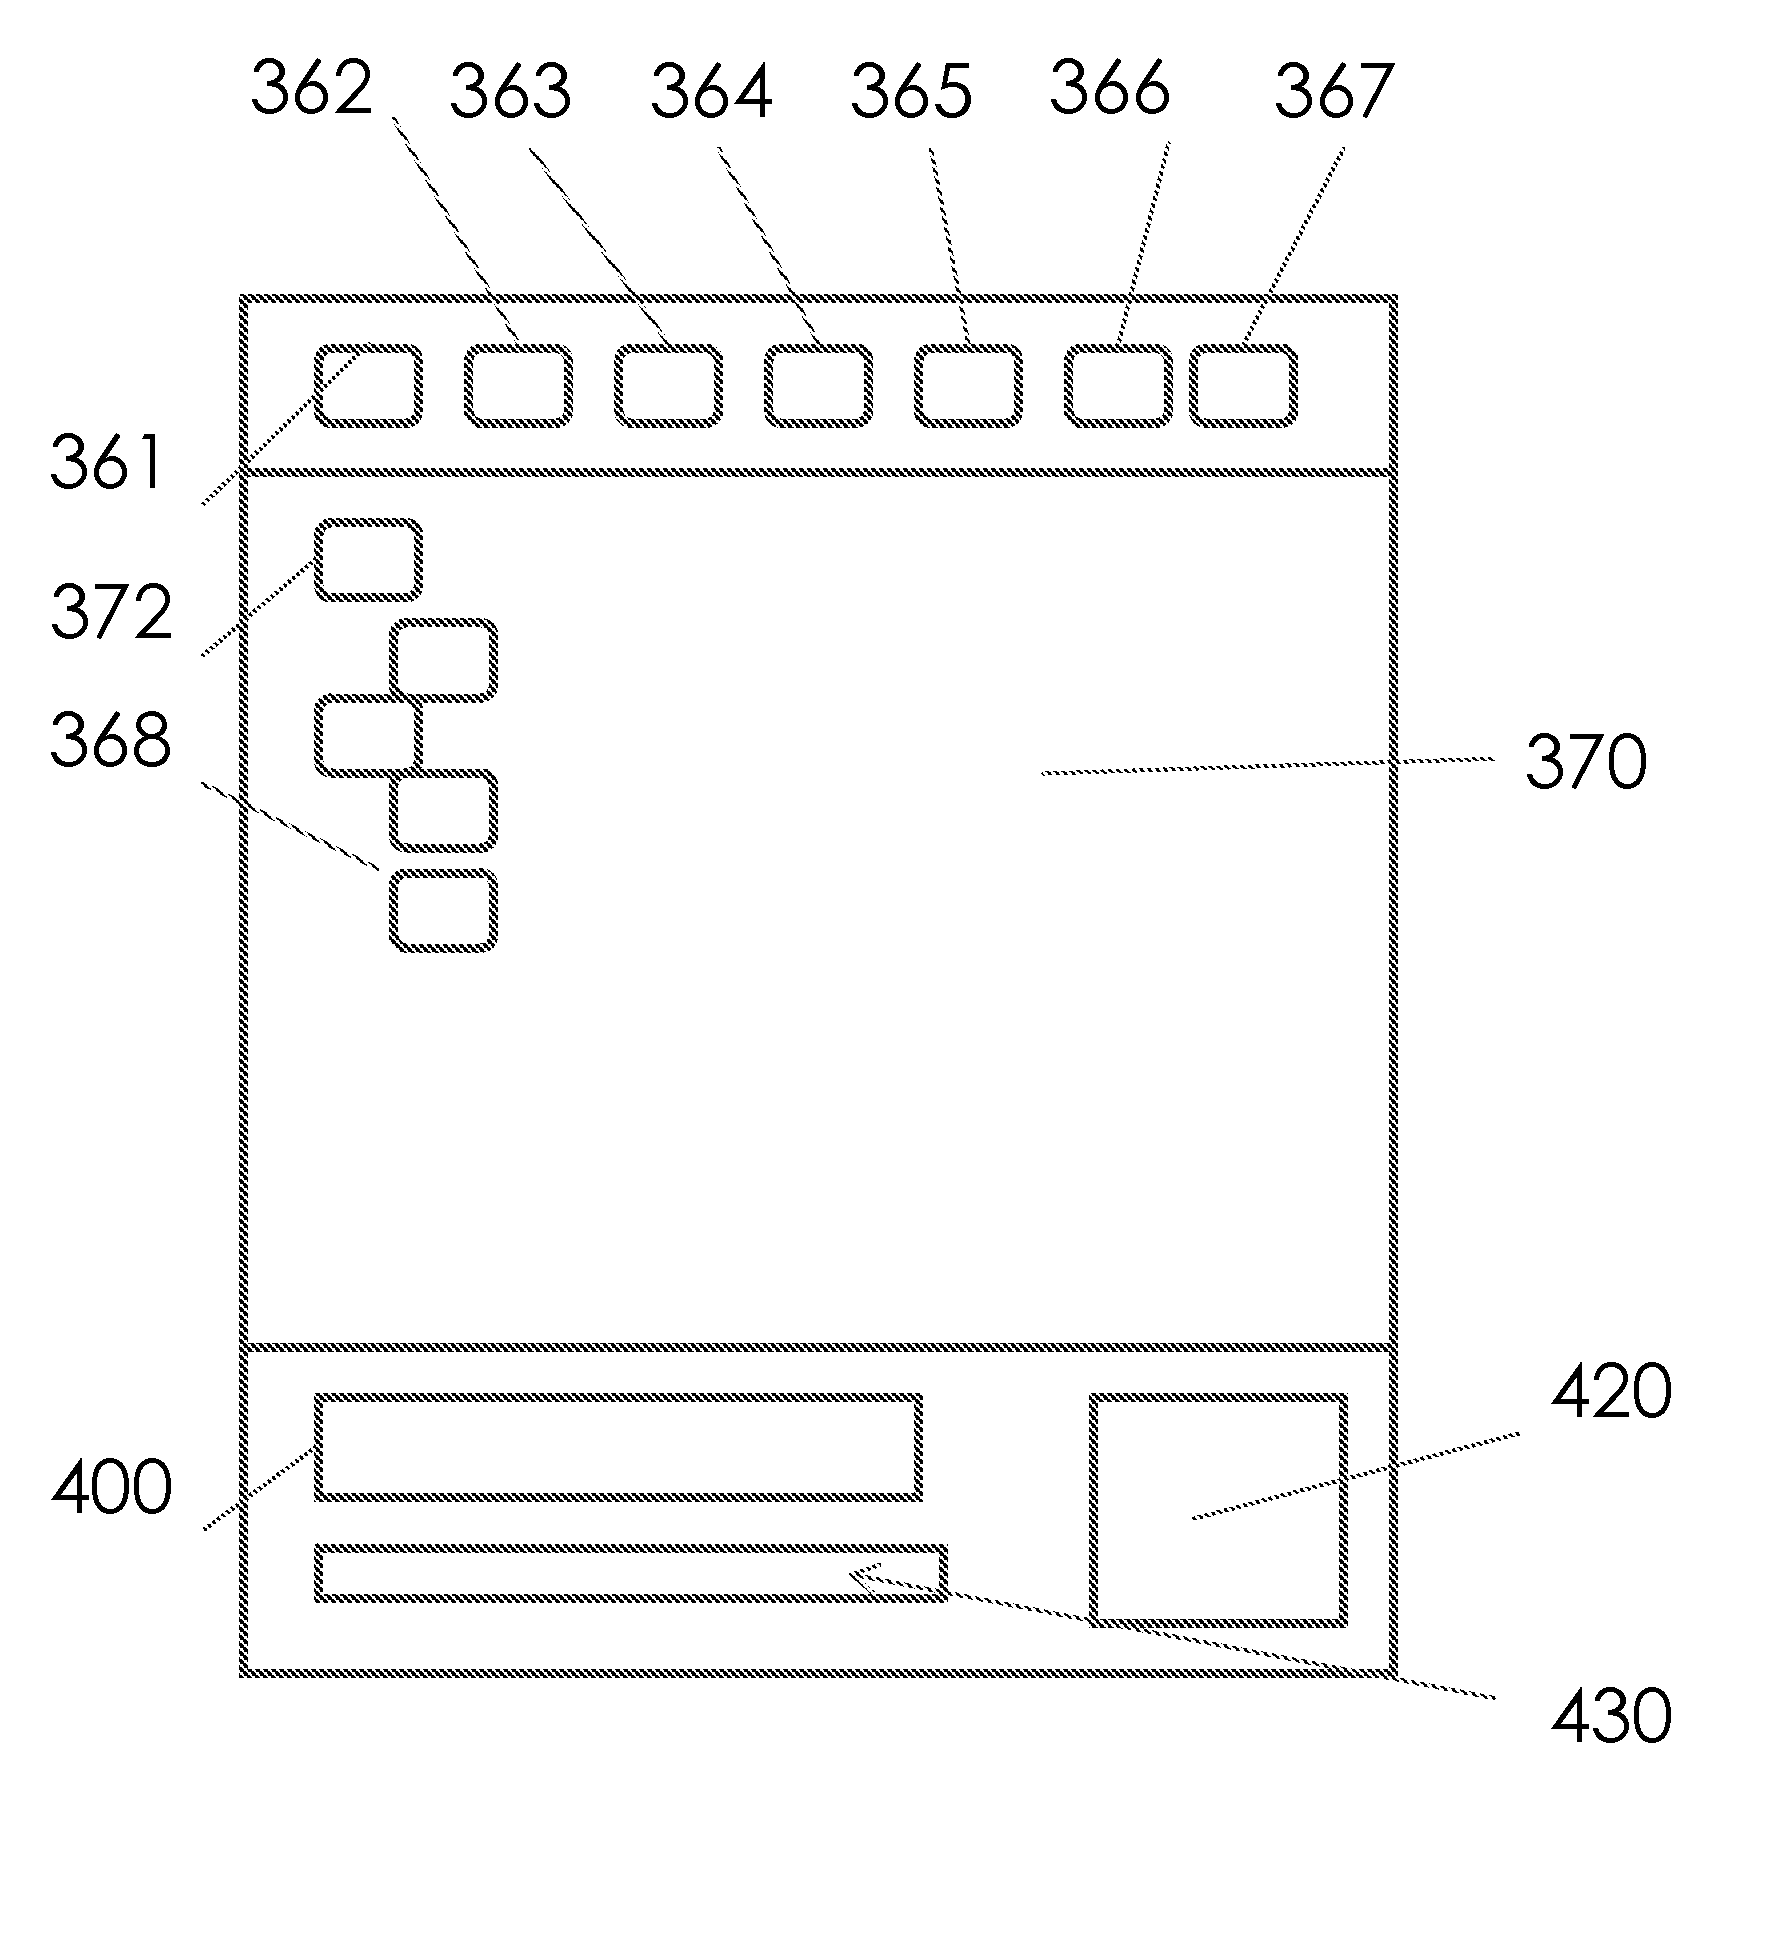 Method and apparatus for storing and accessing URL links